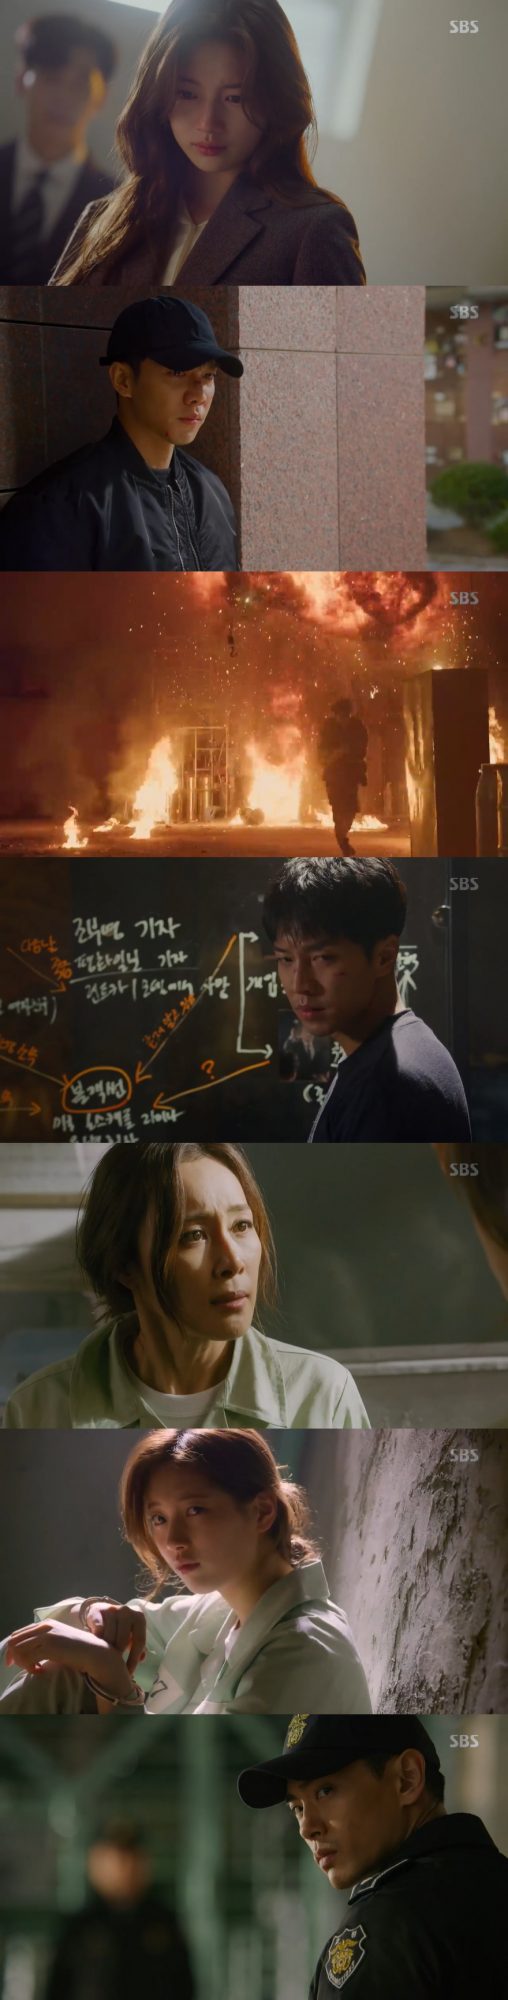 SBS gilt drama Vagabond ended on the 23rd, opening up the possibility of Season 2.Vagabond showed that drama can contain spectacular stories and intense and trendy action as well as movies.If Season 2 is produced, the scale will become even bigger based on the bigger background of the play and the bigger spatial background.Cha Dal-gun (Lee Seung-gi), who was chasing behind the accident on the air, became a mercenary in North Africa by disguised himself as a person.Bae Suzy, who knows only Alro that Chadalgan is dead, became a lobbyist for revenge.Samael, who painted a big picture of the passenger plane, was Prince Edward Island Park (Lee Kyung-young) of Dynamic.Prince Edward Island kept Chadalgun and Kim Ugi (Jang Hyuk-jin) in the warehouse and set fire to kill them, but Chadalgun survived.The rescue was made by Lily (Park Ain) and Kim Do-soo (Choi Dae-cheol), who were looking into the situation near the warehouse. Cha Dal-gun did not announce that he was alive because he was afraid that the confession would be dangerous.Hong Soon-jo (Moon Sung-geun) also found out that Samaels identity was Prince Edward Island, and the two cooperated in earnest.Chadalgan speculated that it was an organization based on a mercenary company called Black Sun, which involved Jerome (Jew Tae-oh) and Prince Edward Island.He visited the political party, who resigned from the presidency, and asked for help, saying, I will go into the tiger oyster to catch the tiger.Jessica Lee (Moon Jung-hee), who is in prison, noticed that she was being watched and asked the NIS TF team to protect her, saying she would give information about Samael.The confession went into prison on his own and Samael got information that was Prince Edward Island.Jessica was able to trick Prince Edward Island into receiving a summons order from the United States of America government through him.Not long after, Gohari left prison, where Jessica was released on bail after being summoned to United States of America.Jessica offered the confessional a lobbyist to disrupt Hong Sun-jo and Prince Edward Islands oil drilling business, and the two headed to the Kingdom of Key Lia.In KeyLia, a terror was believed to be the work of anti-government forces.Chadalgan, who became a mercenary, was ordered by Prince Edward Island at the anti-government suppression site and encountered Jerome, who came to recover biochemical weapons.Chadalgan burst into biochemical weapons, threatening Jeromes life, asking who was behind the passenger planes terror.Jerome had an international secret financial organization called Axis, and the terror target area was KeyLia.When Chadalgan arrived in KeyLia, he and East Ry went on a lobbyist shooting mission, but the target of the shooter in his sights was Gohari.When the car darted, Ry said he would shoot, and Ry shot the same. The confession and the guards rushed to the gunshot.Vagabond showed an individual struggle against a national conspiracy. The story of the reversal stimulated the viewers reasoning instincts.Blockbuster-class action, which was not seen in the existing drama, was not able to keep an eye on the car chase in Morocco and Portugal as well as the car chase, alley fighting, and bare action that crossed the building.But in the second half of the story, the series of defeats caused by sports broadcasts such as baseball and soccer interfered with the immersion.In addition, a 60-minute episode was divided into three parts, which reduced the concentration of the city hall.Moreover, the story is not finished properly in the final meeting, and it is controversial whether it is an open ending or an incompetent ending.The related article says, Even if you make Season 2, you should make some endings in Season 1, what is the opening ending? I will blow a few weeks and finish this way. Why do you make a pre-production?The script was criticized as the first time to end it by ovating and swearing rather than ... (I will go).